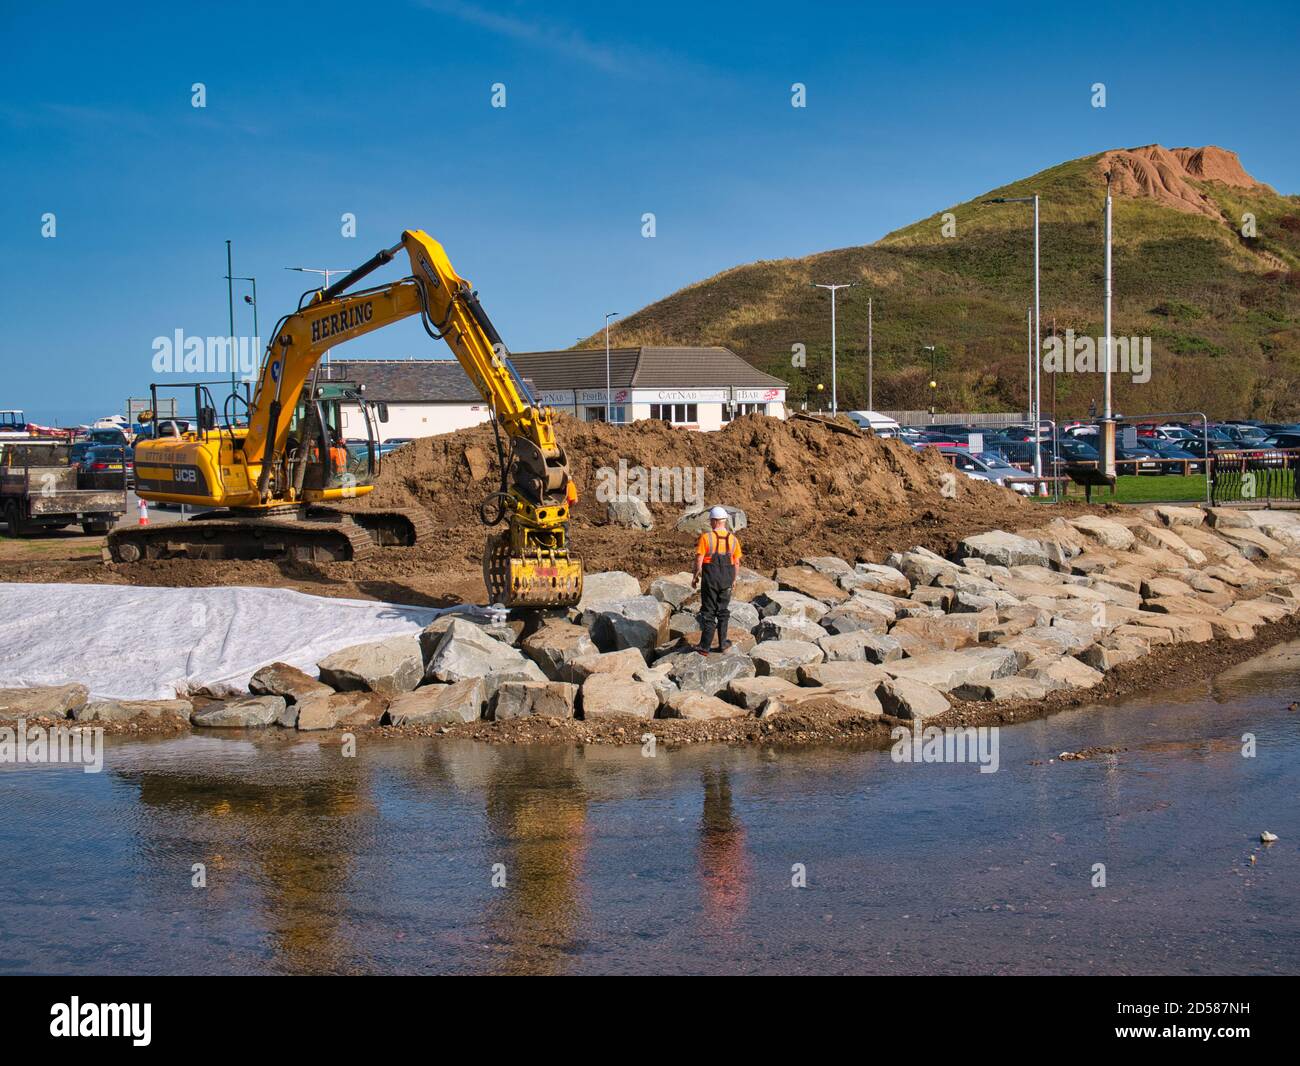 The construction of flood defences along Skelton Beck using heavy earth moving equipment and large stone blocks Stock Photo